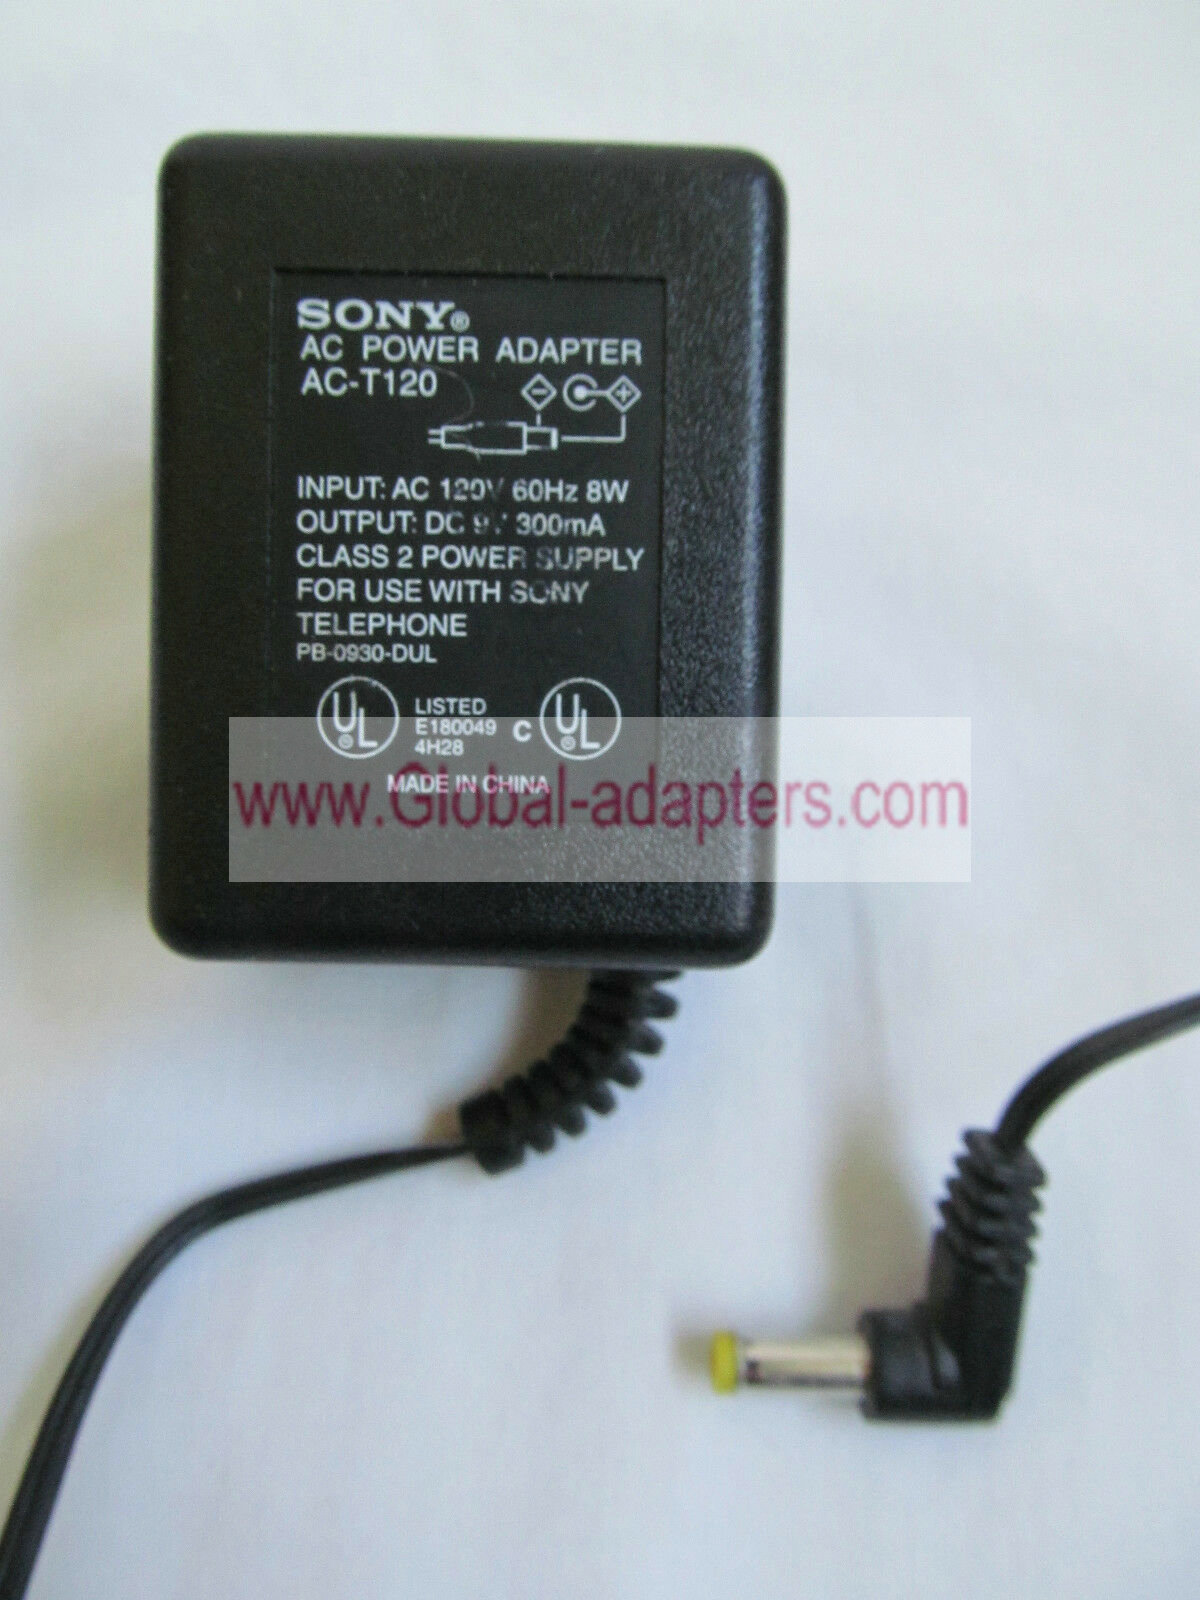 NEW 9V 300mA Sony AC-T120 AC Adapter Lass 2 Power Supply For Sony Telephone